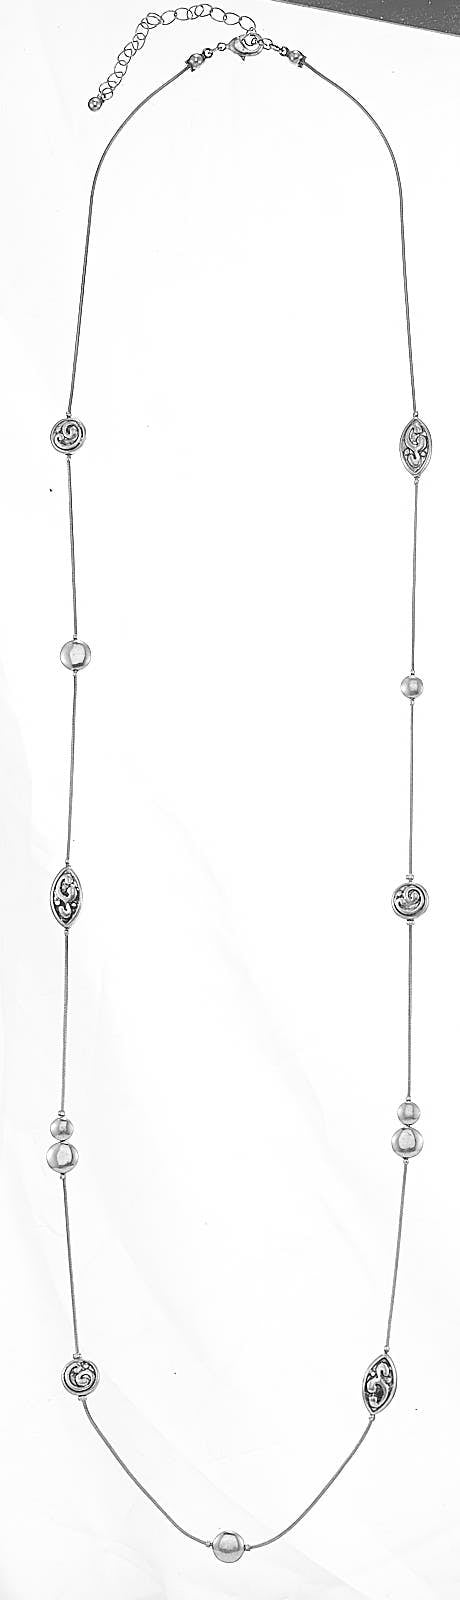 HNN90140 Long round and oval shape beaded necklace (IH9)